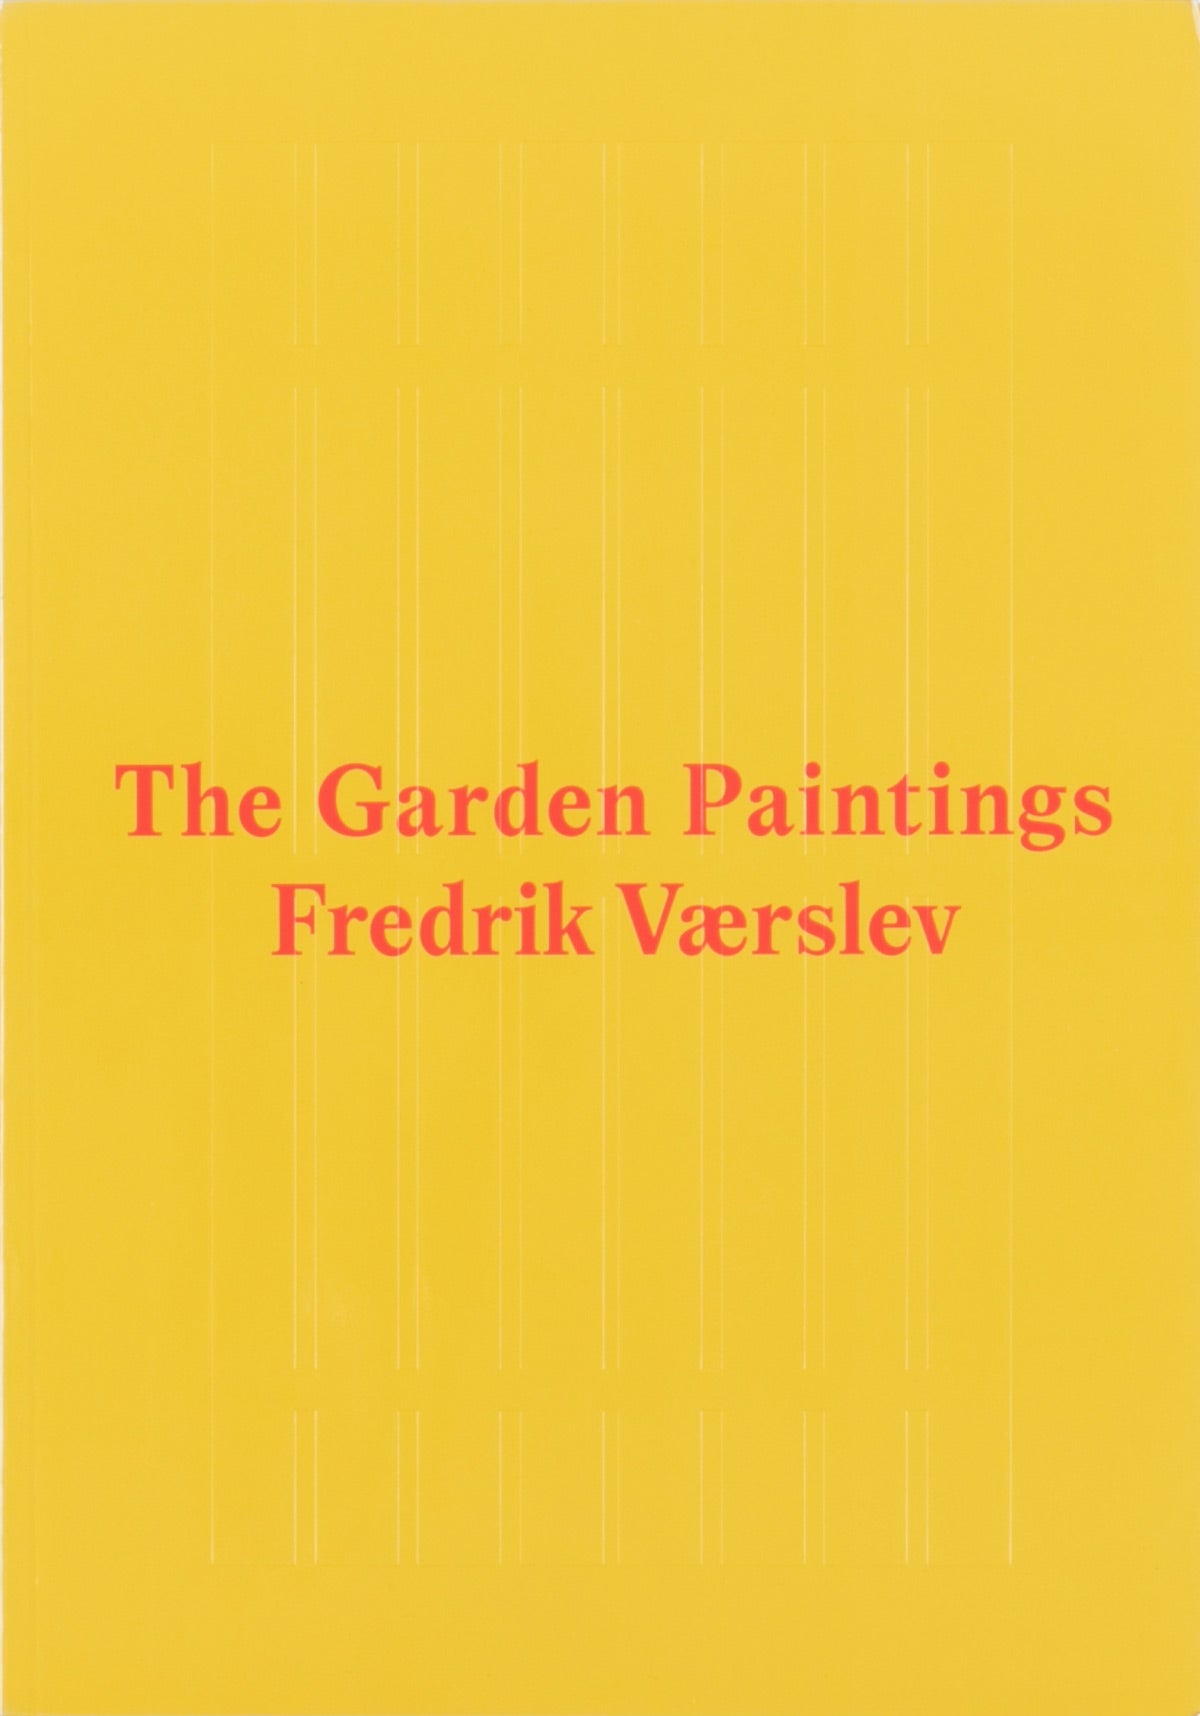 The Garden Paintings